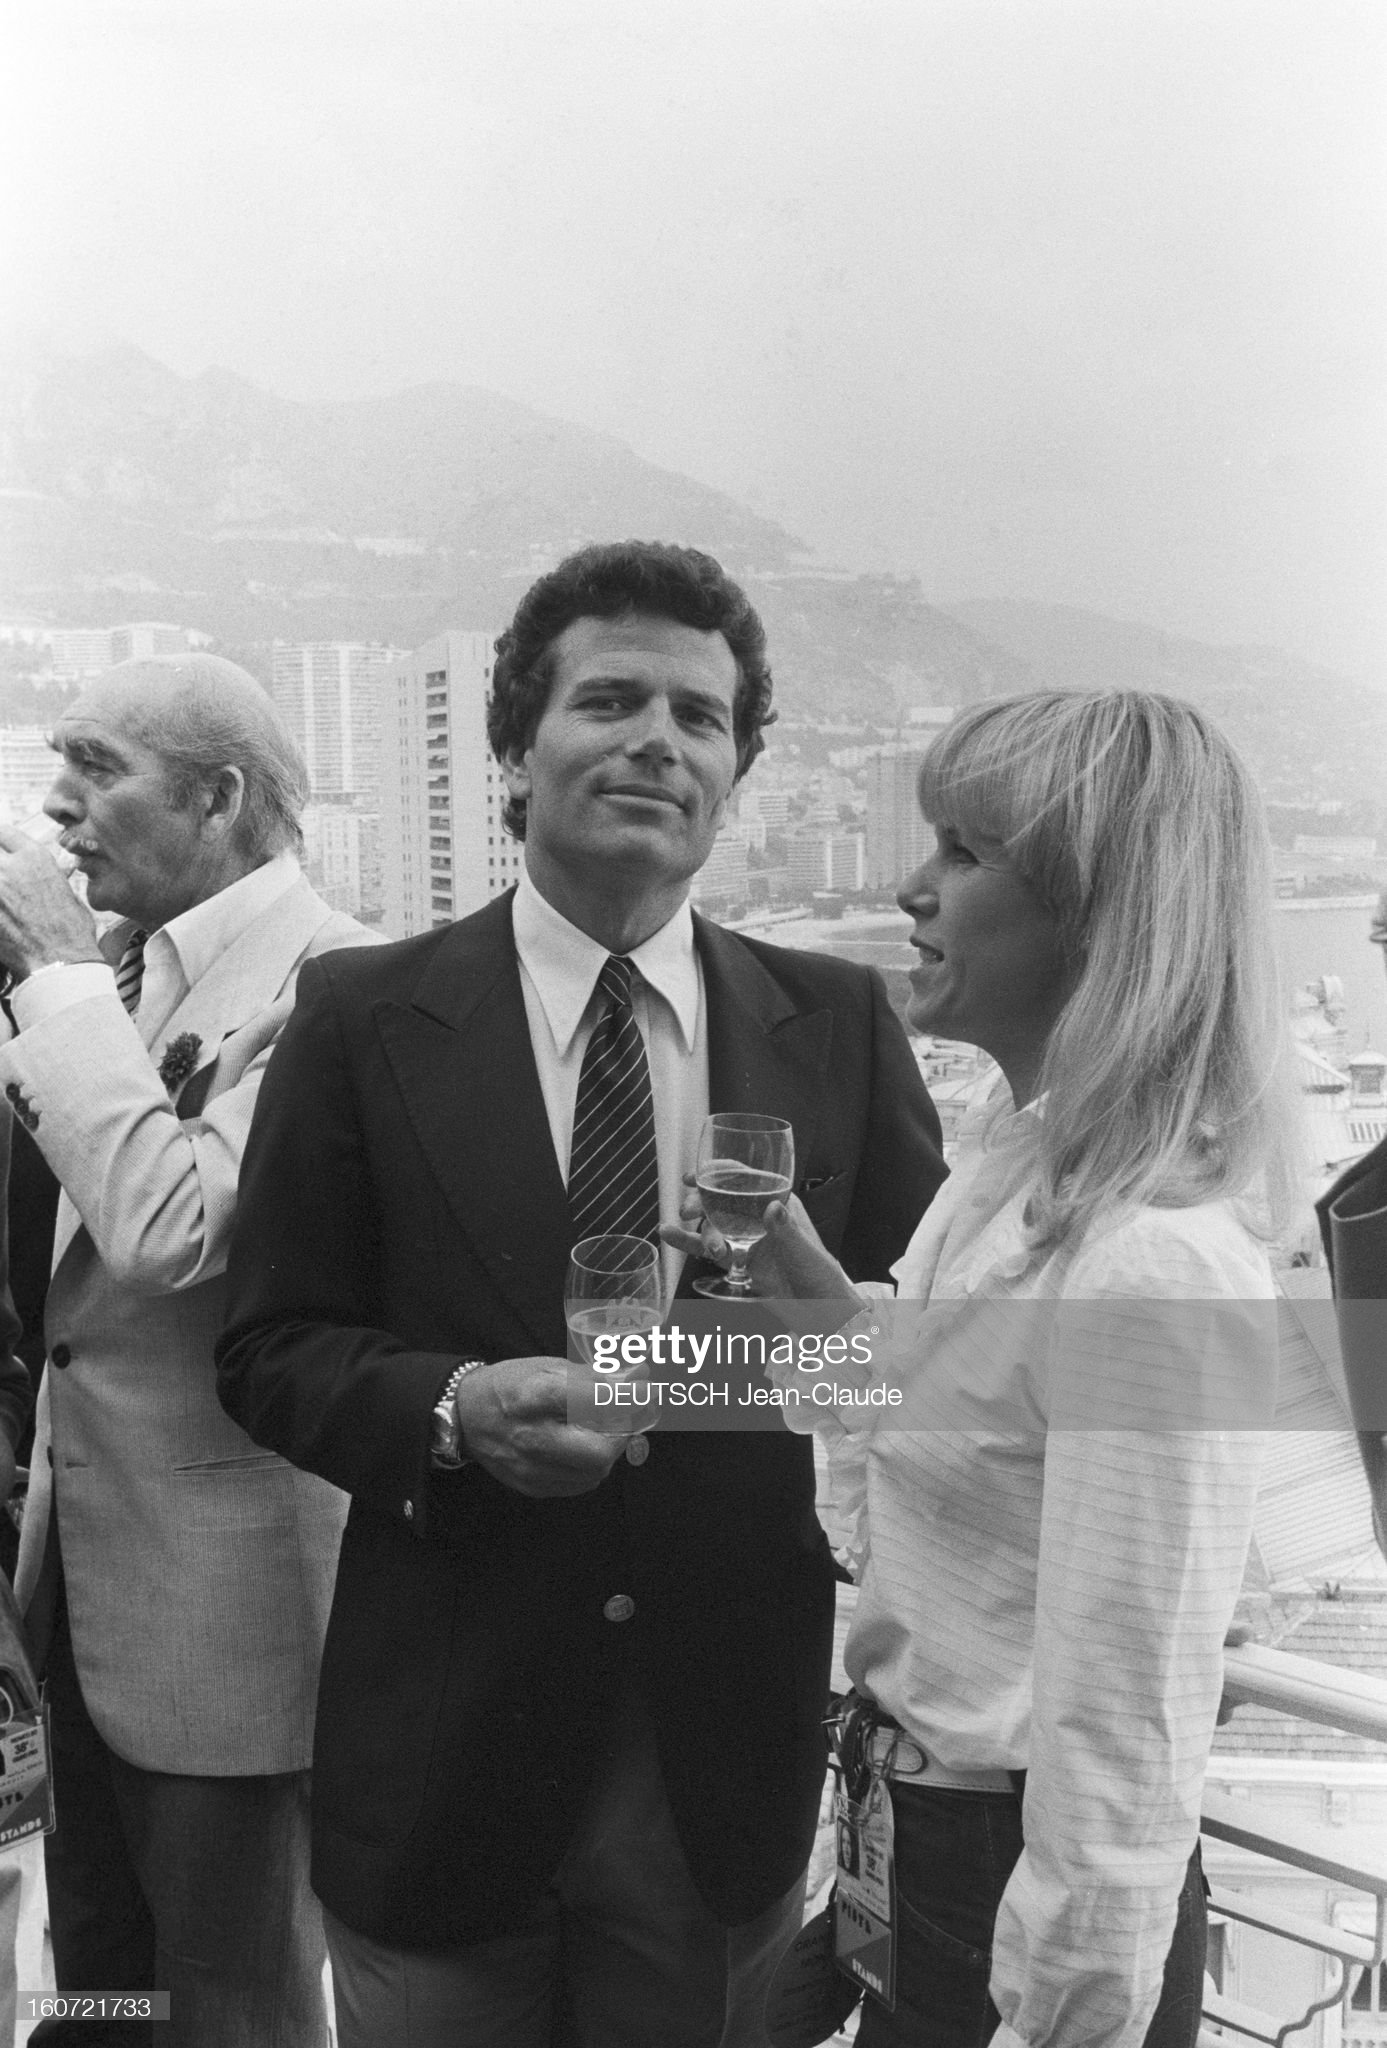 May 18, 1980, at the reception of Fred Chandon during the Monaco Formula 1 Grand Prix, on a terrace, Eddie Barclay, in profile, Patrick Wayne, a drink in his hand and an unidentified woman.